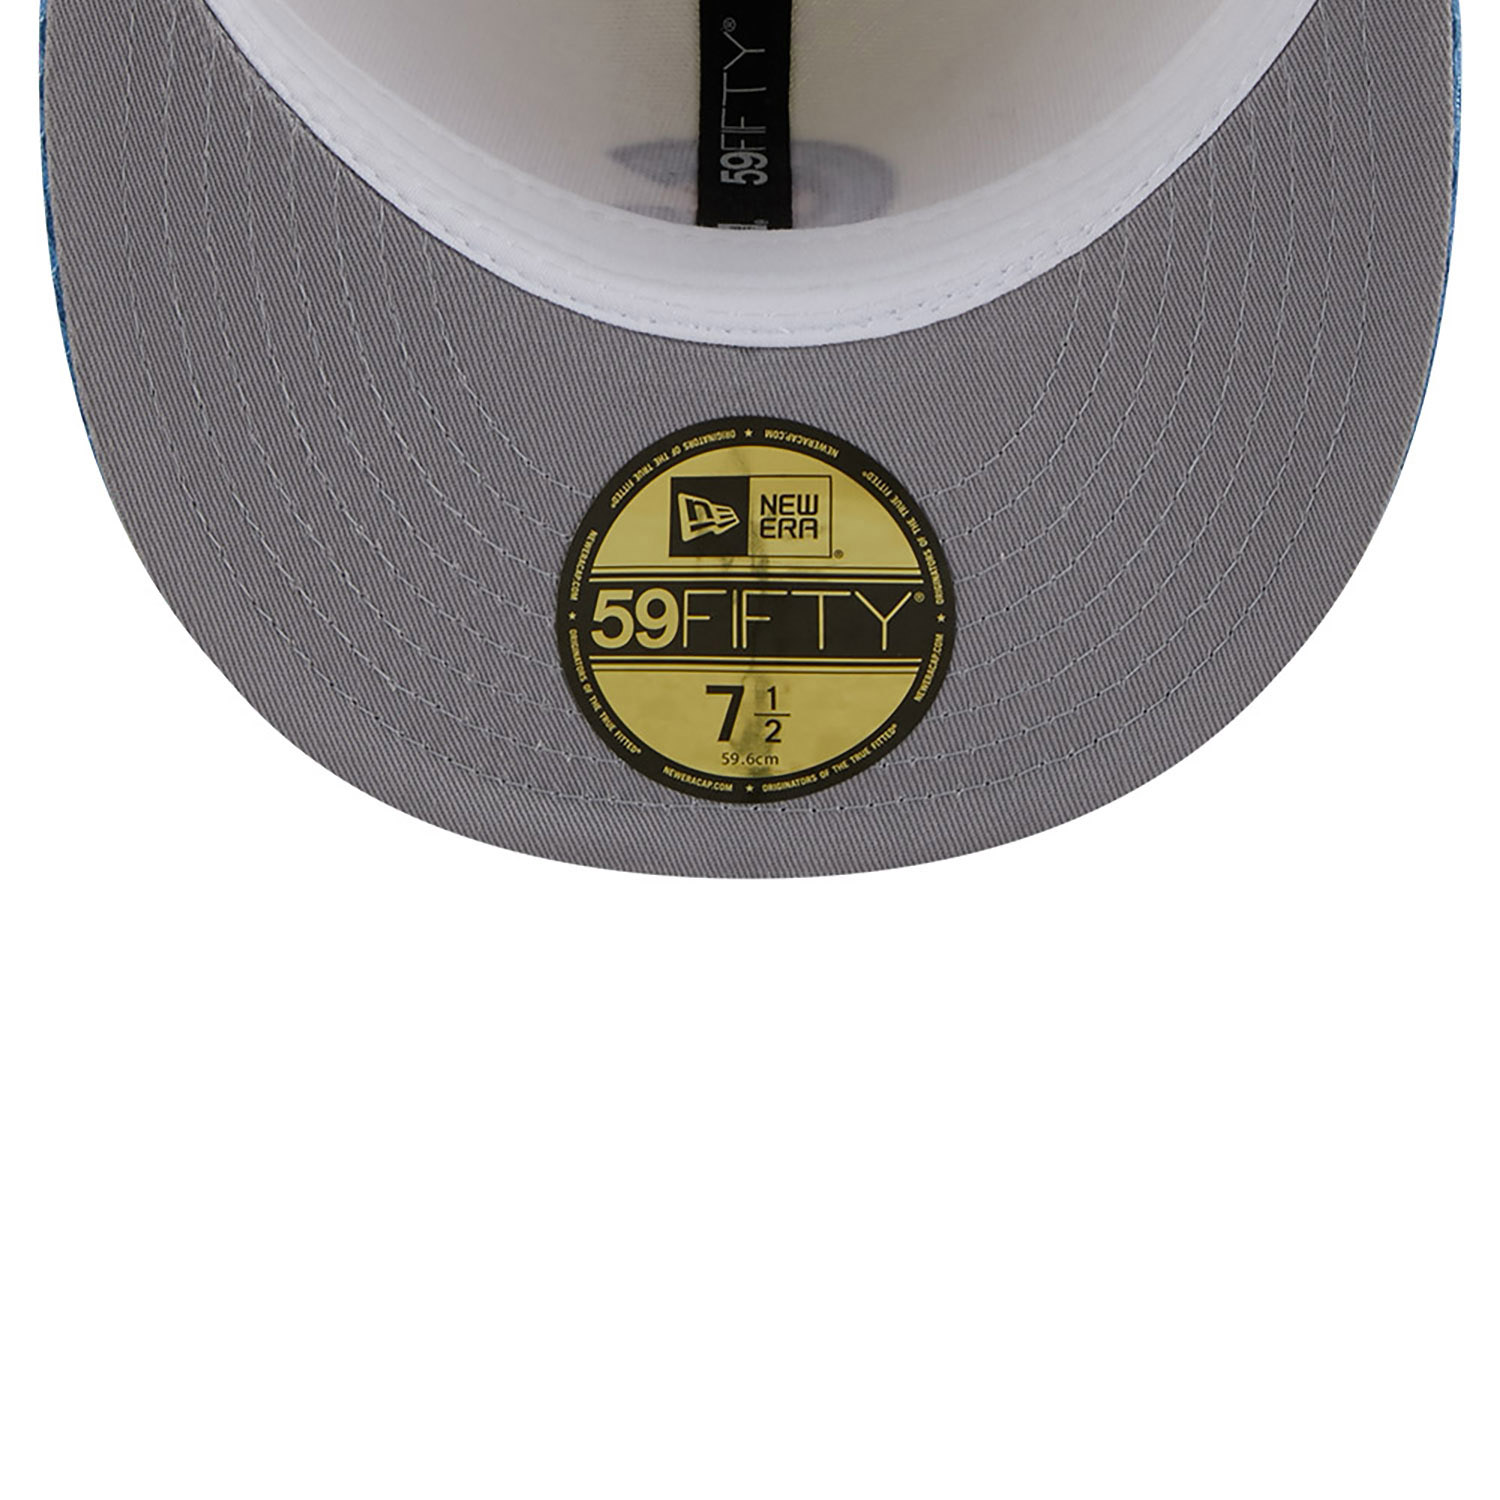 Chicago Cubs City Mesh Chrome White 59FIFTY Fitted Cap